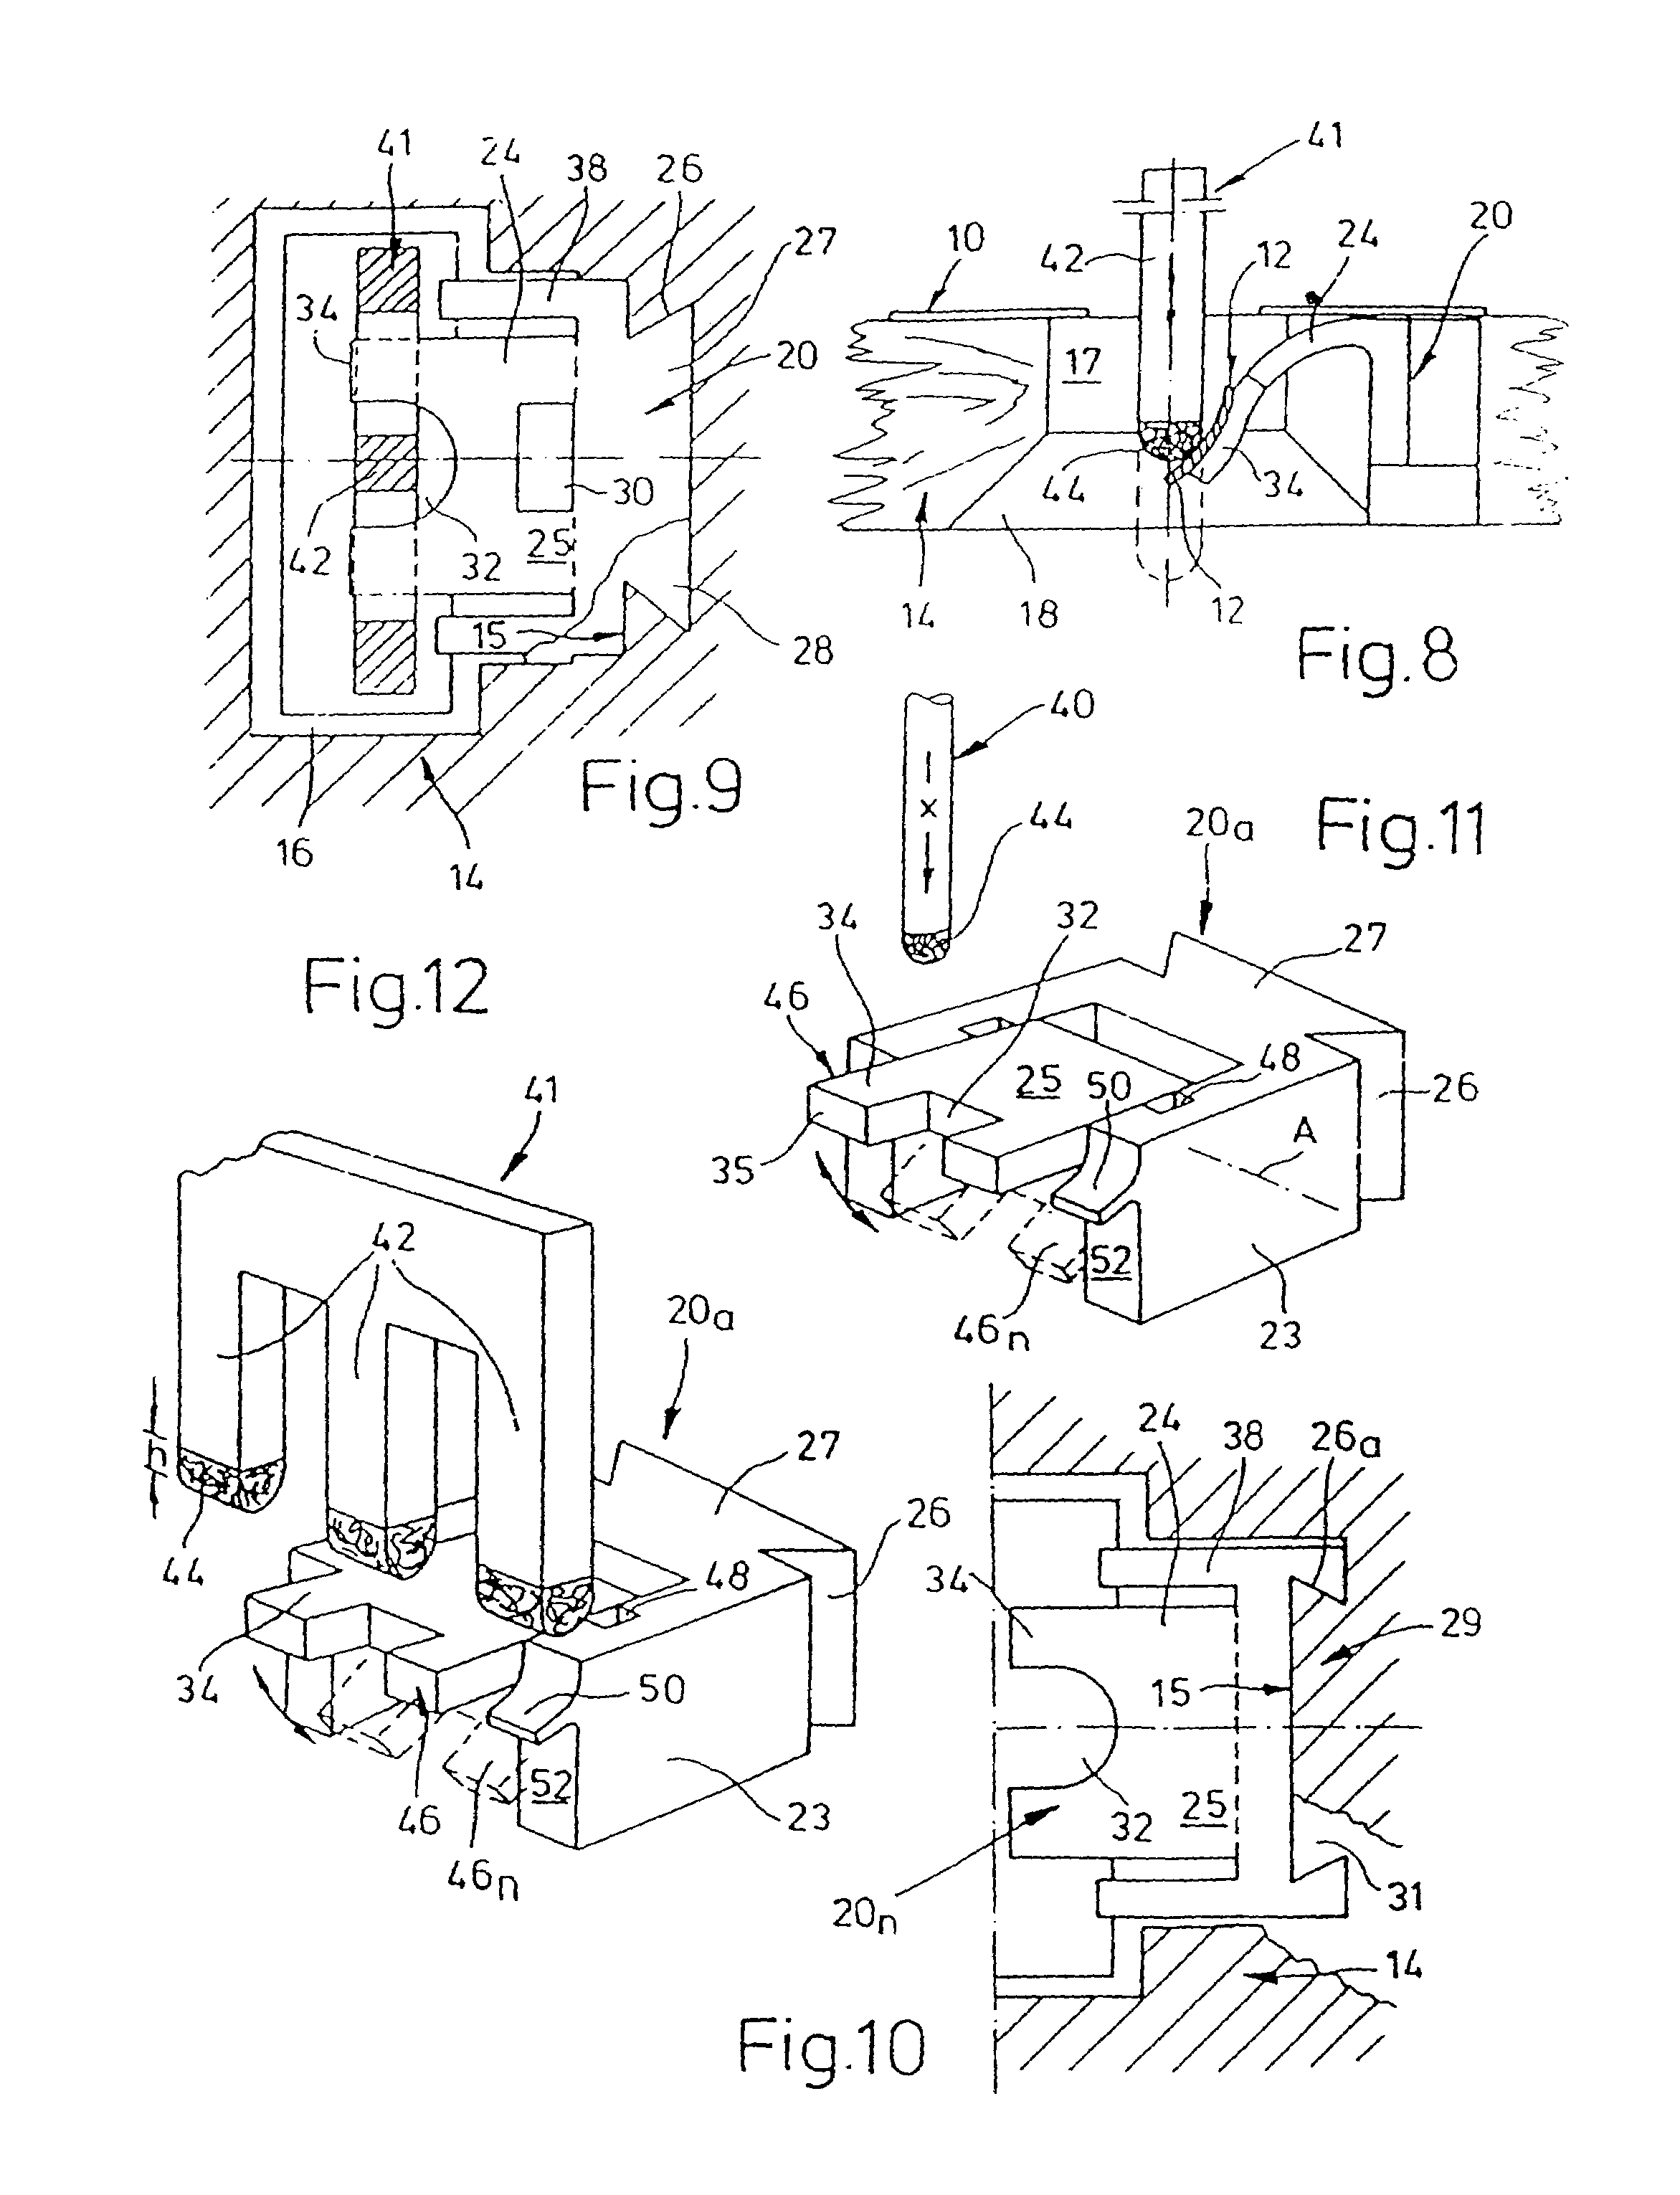 Device for removing break-off components from a sheet of material or equivalent